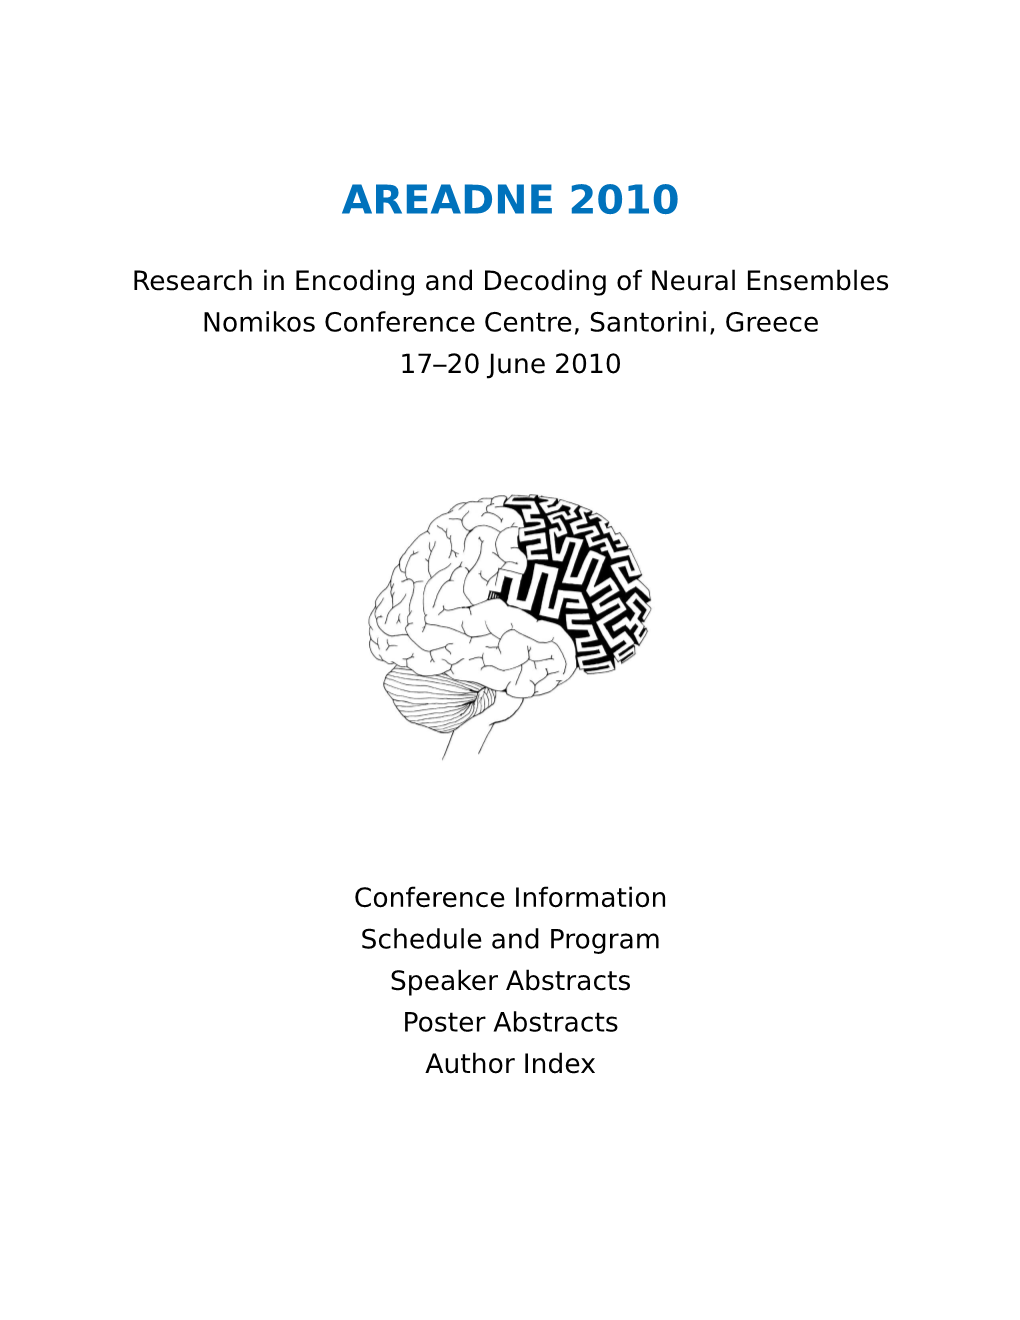 Proceedings of AREADNE 2010 Research in Encoding And